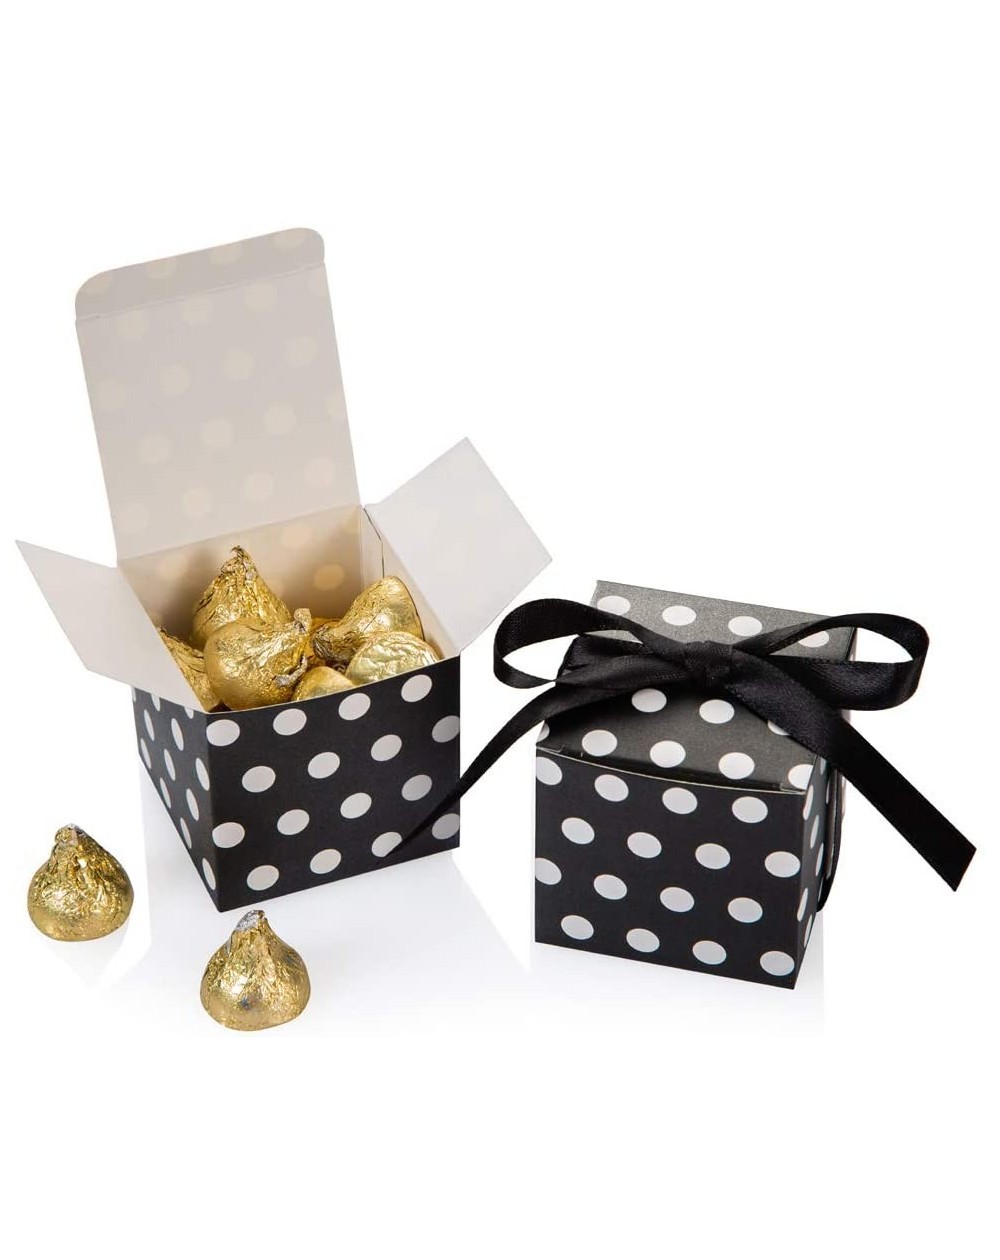 Party Favors Black Gift Candy Box with Whtie Dots Bulk 2x2x2 inches with Ribbon Party Favor Box- White Dots- Pack of 50 - Bla...